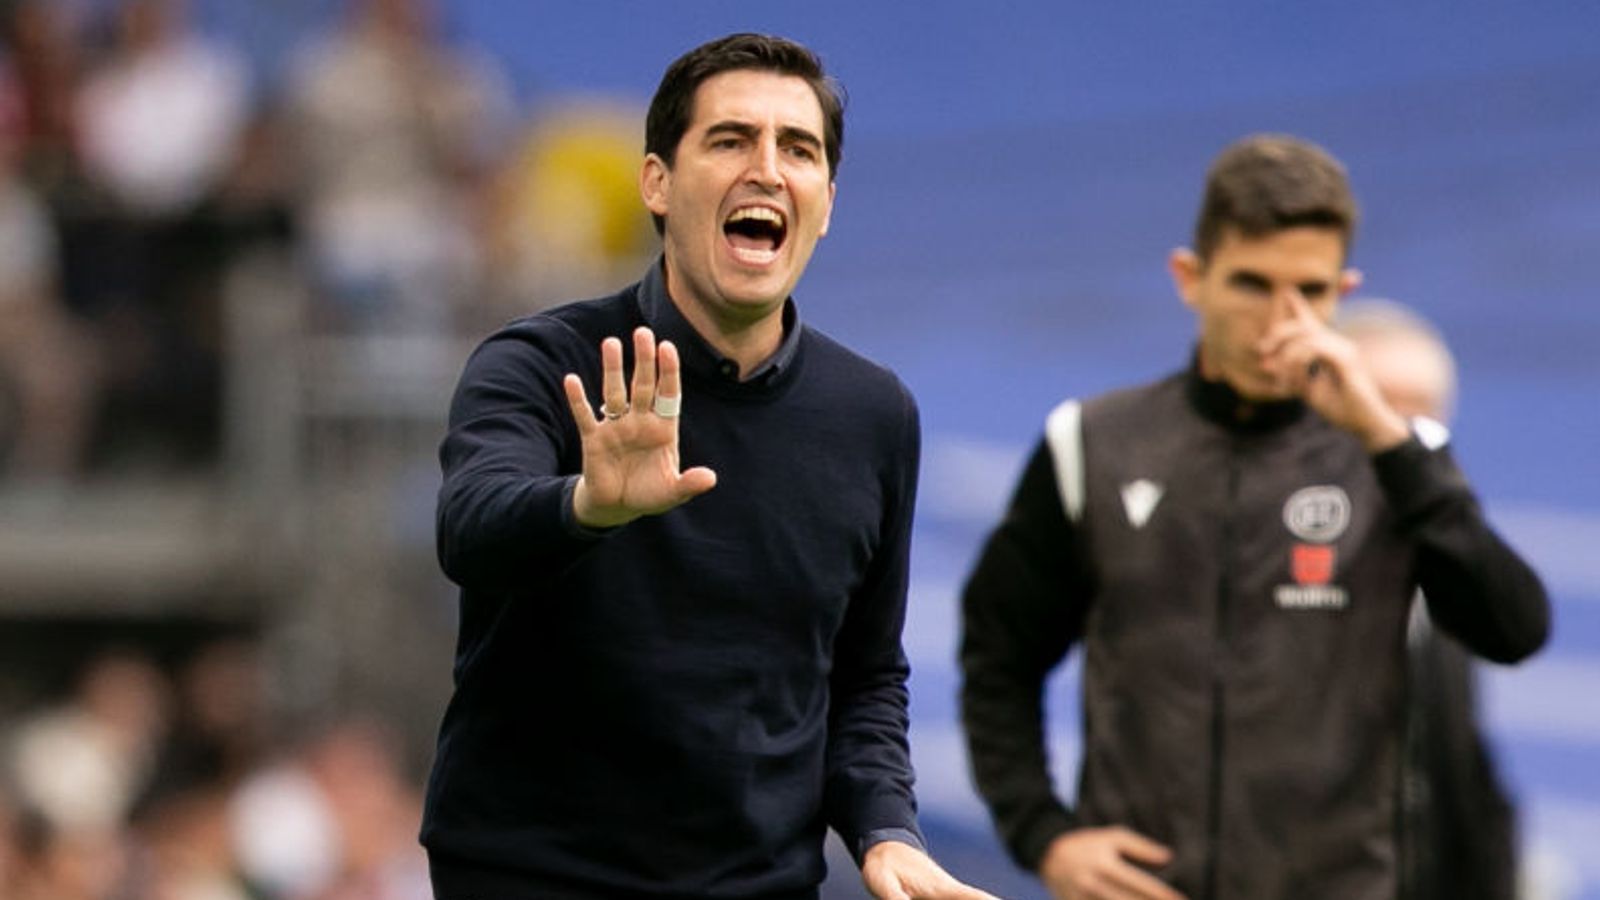 Bournemouth: Cherries appoint Spanish coach Andoni Iraola as new manager after sacking Gary O’Neil | Football News